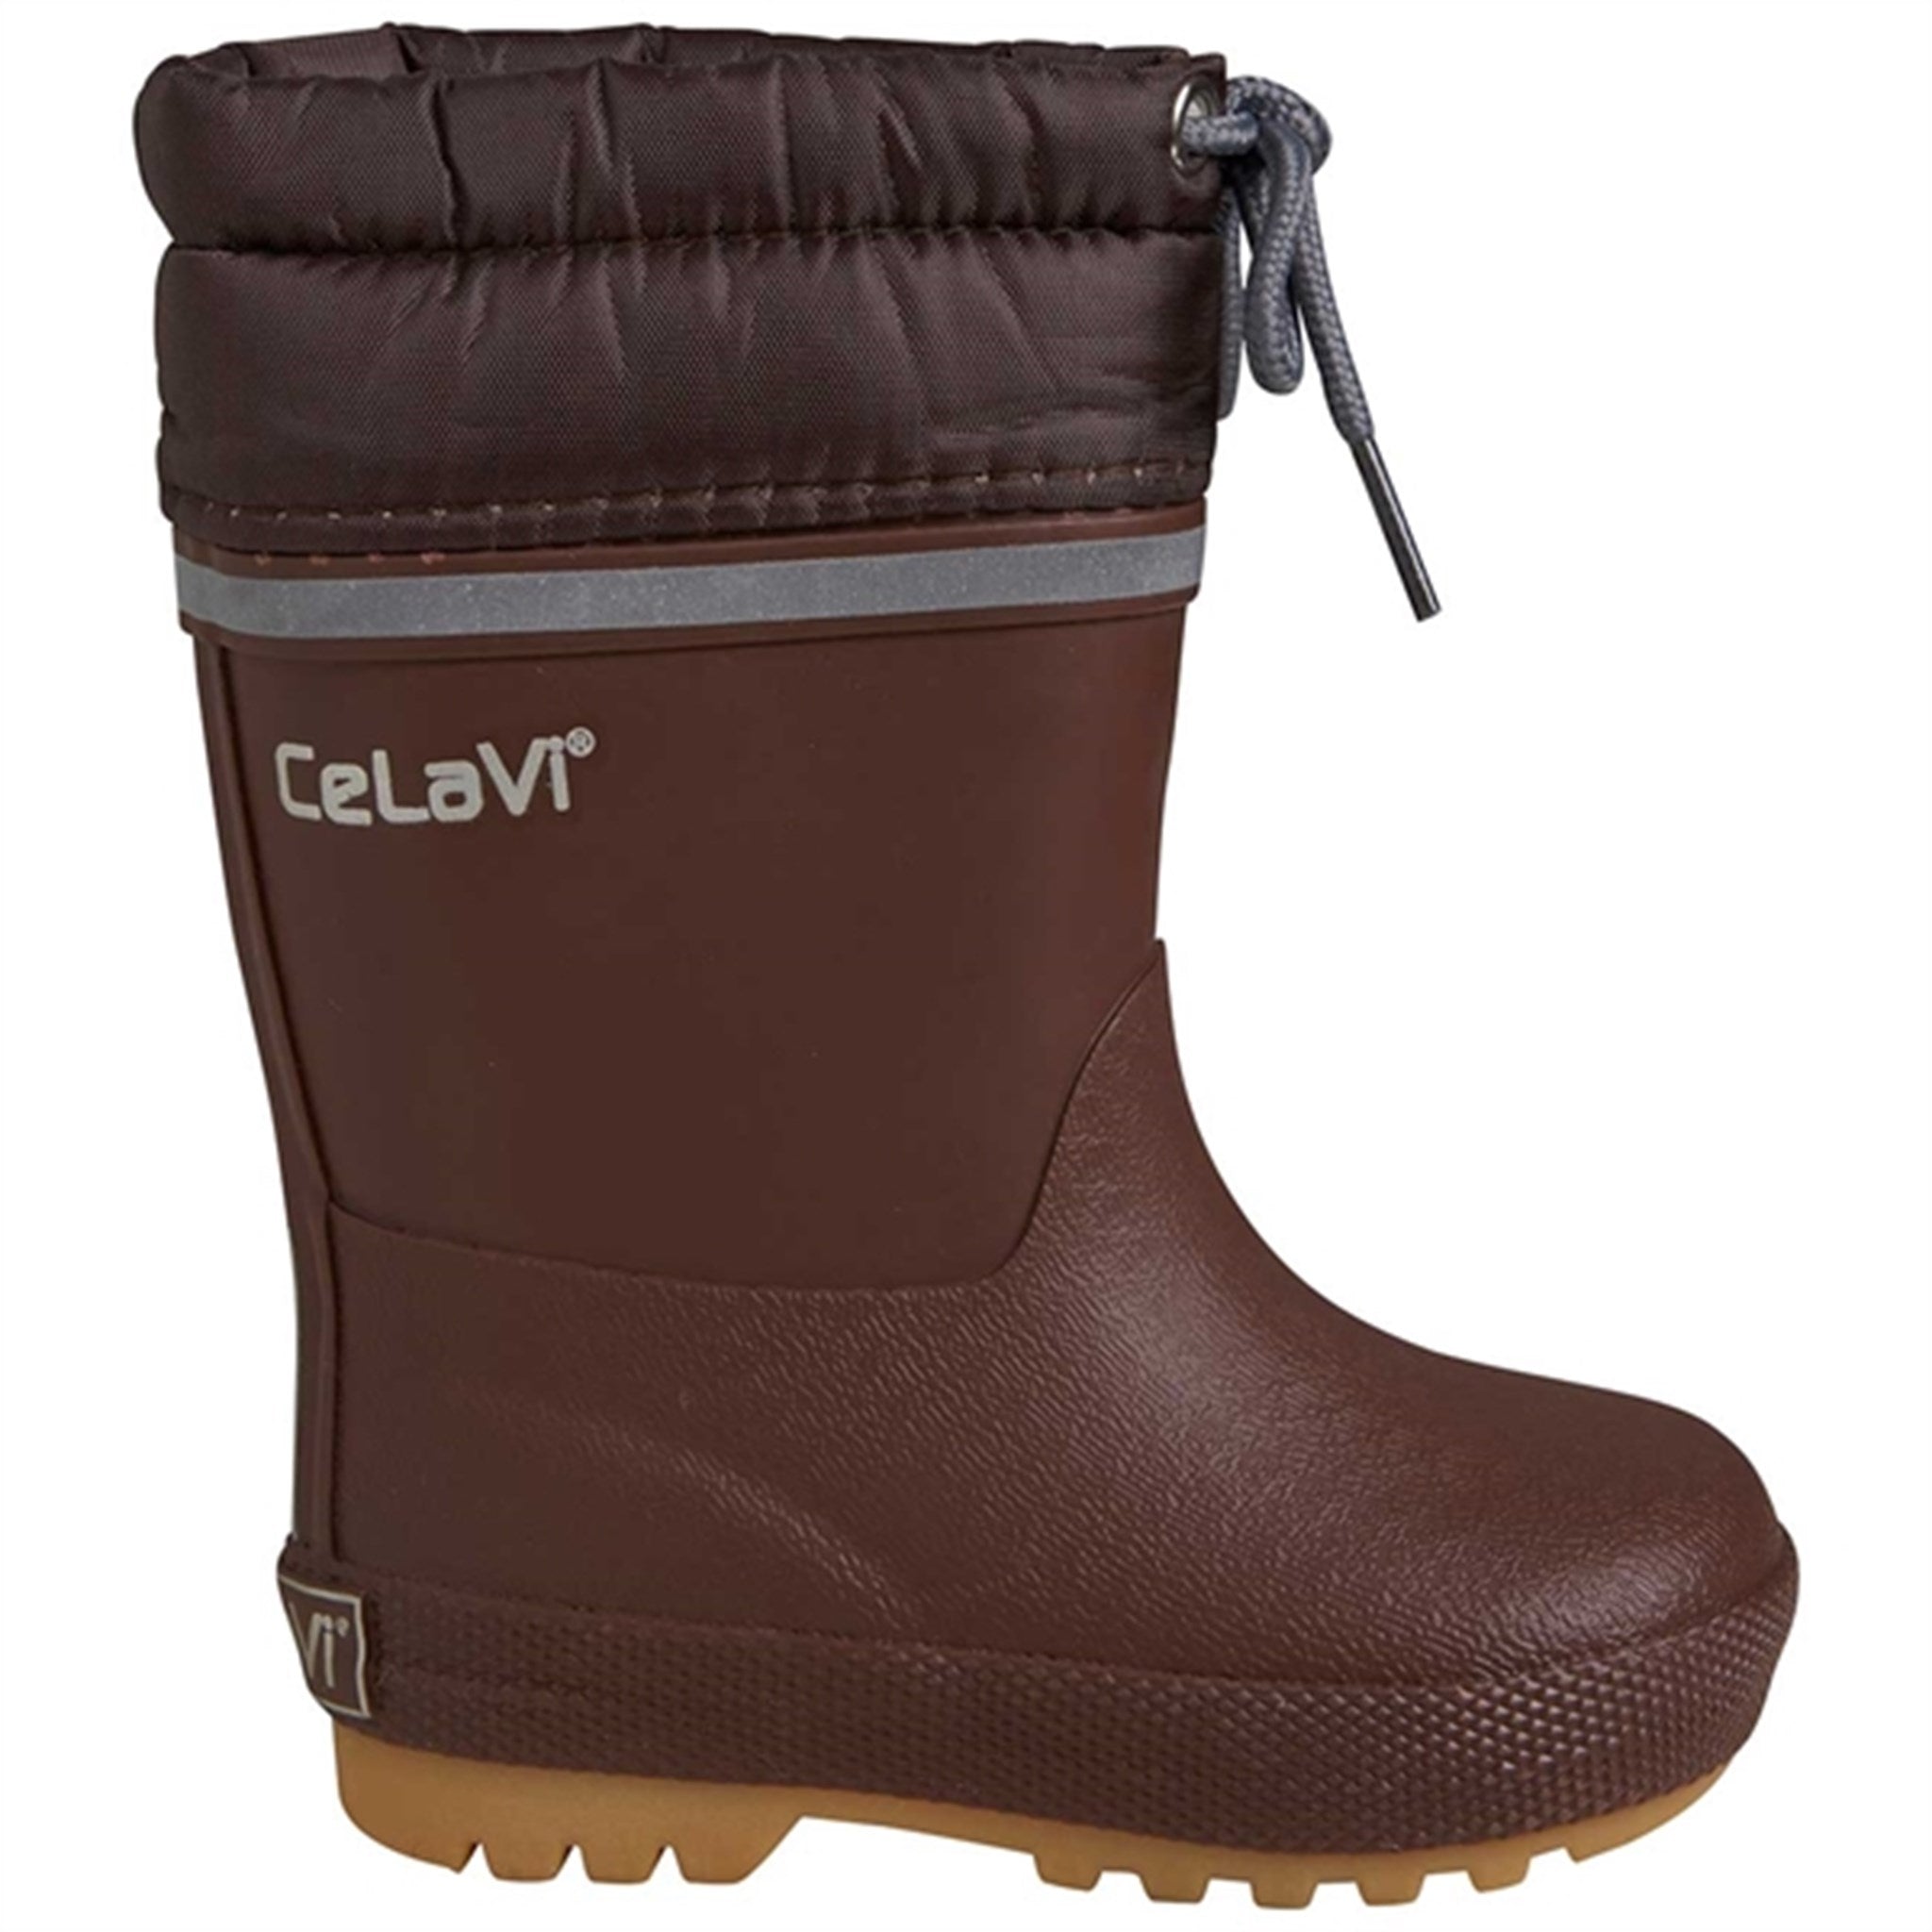 CeLaVi Thermal Wellies w. Linning Rocky Road 2